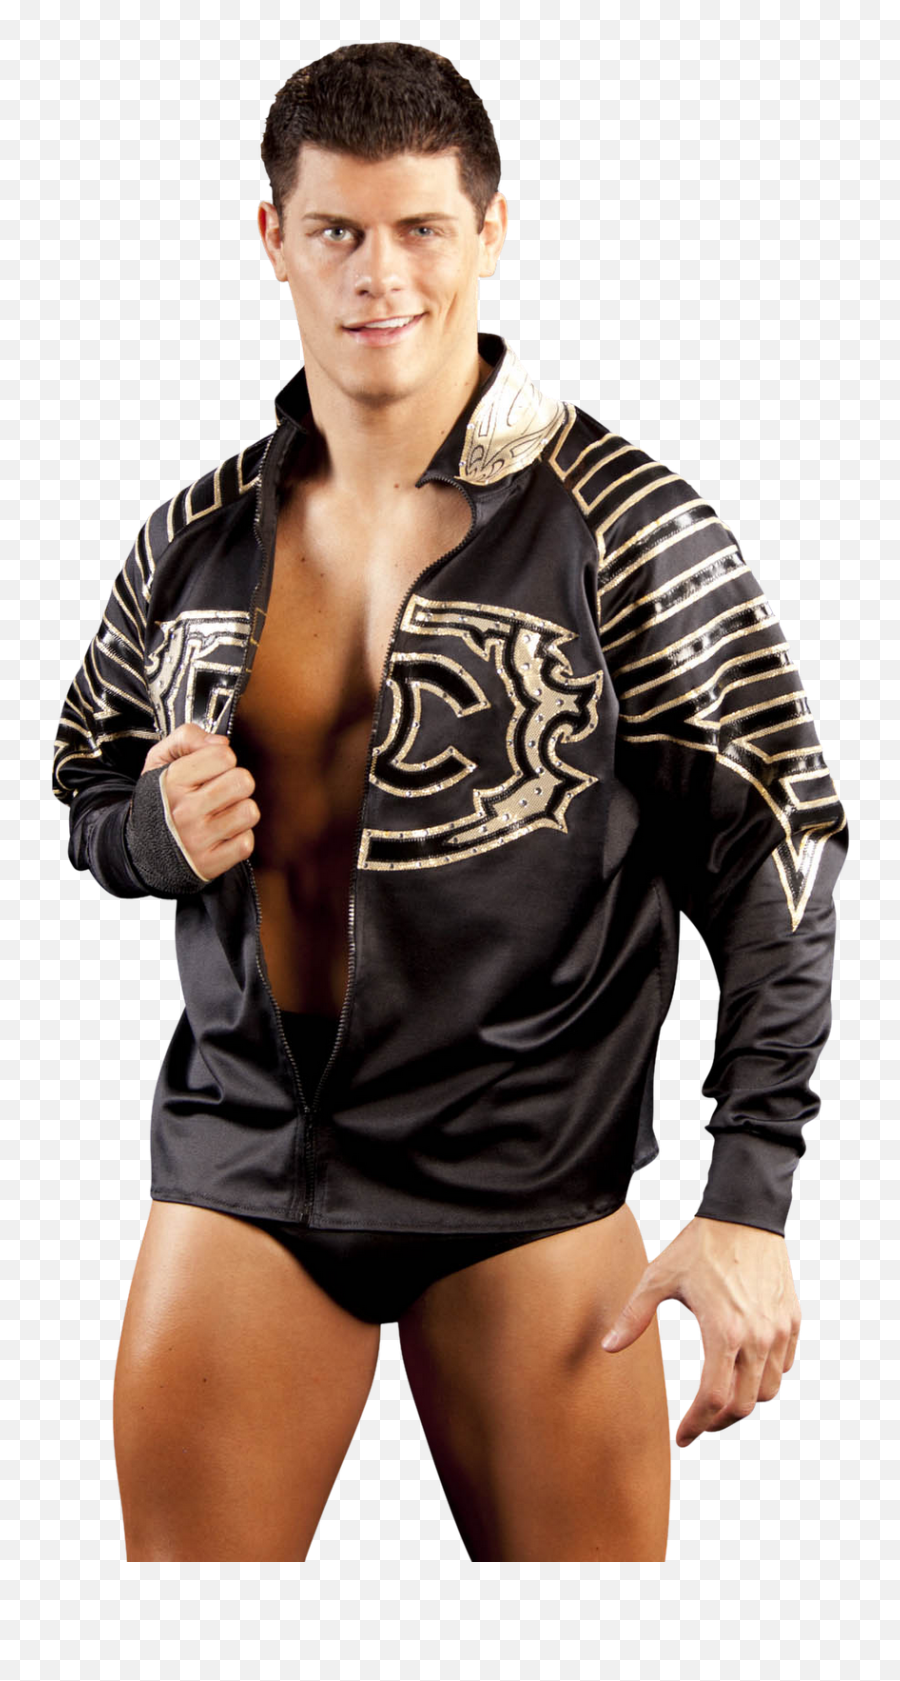 Cody Rhodes Transparent Image - Cody Rhodes Wwe Png,Cody Rhodes Png